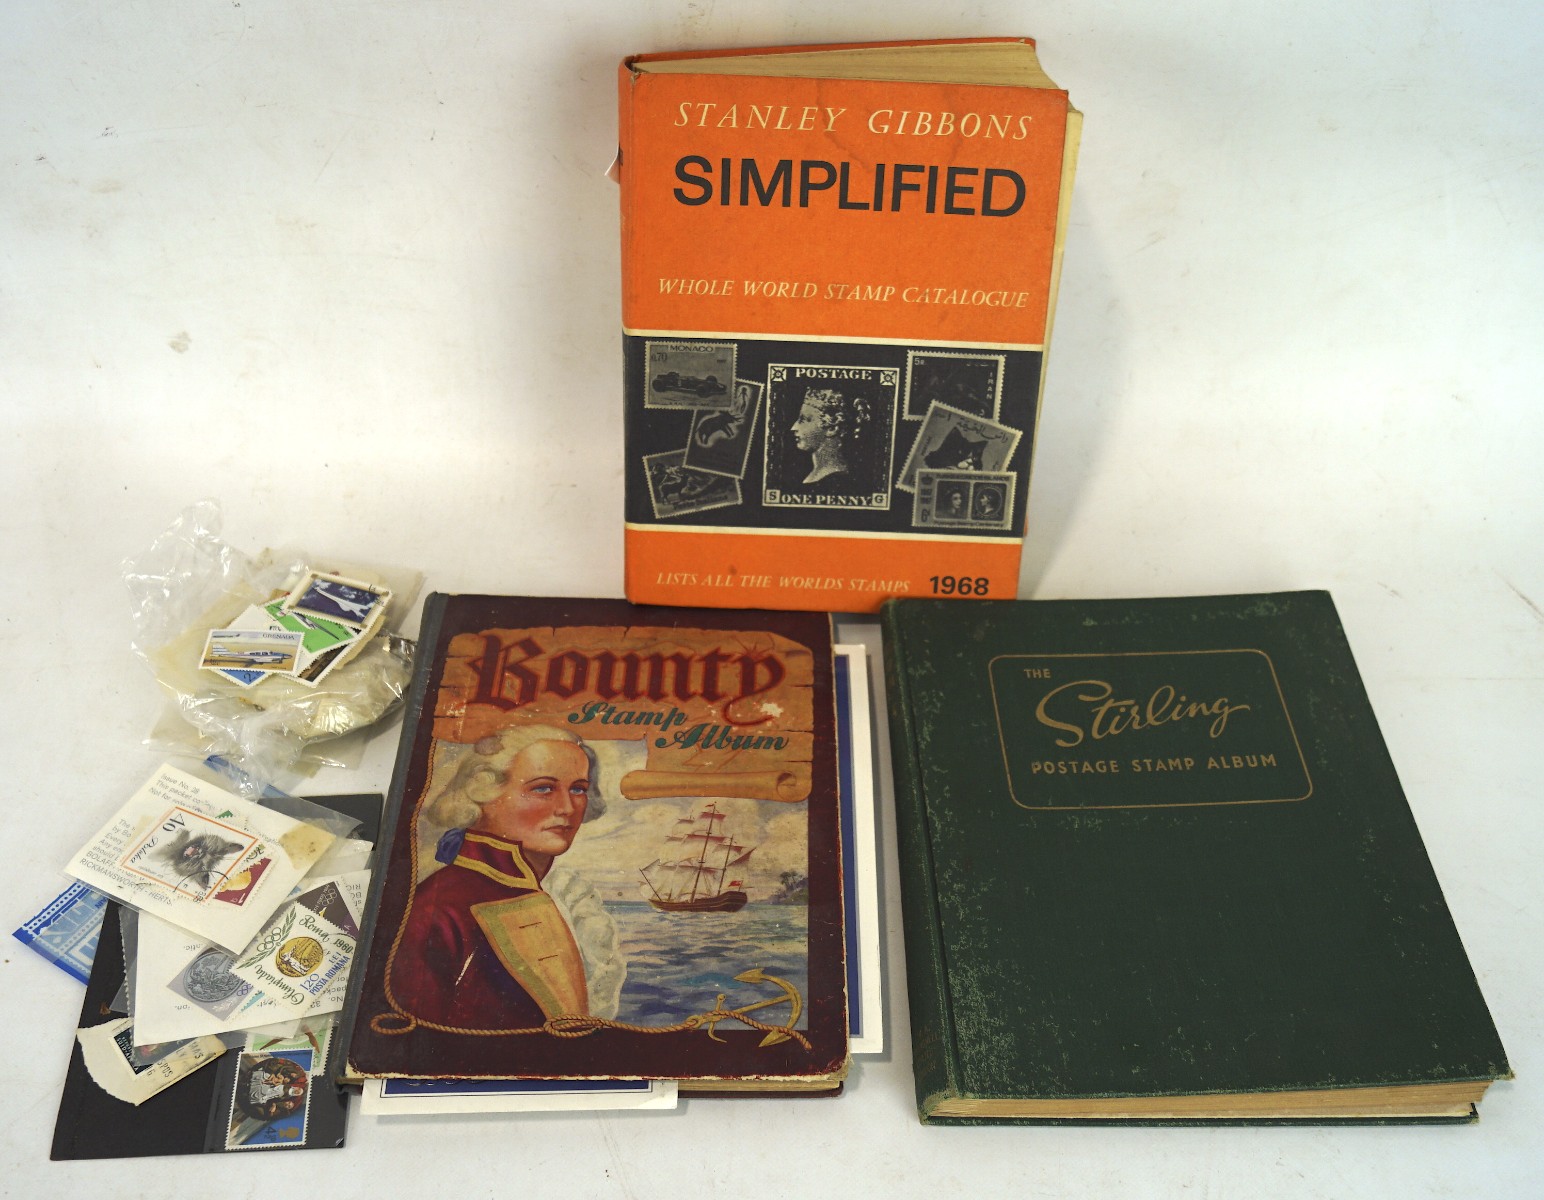 Two 20th century stamp albums, featuring examples from Denmark, Great Britain, and more